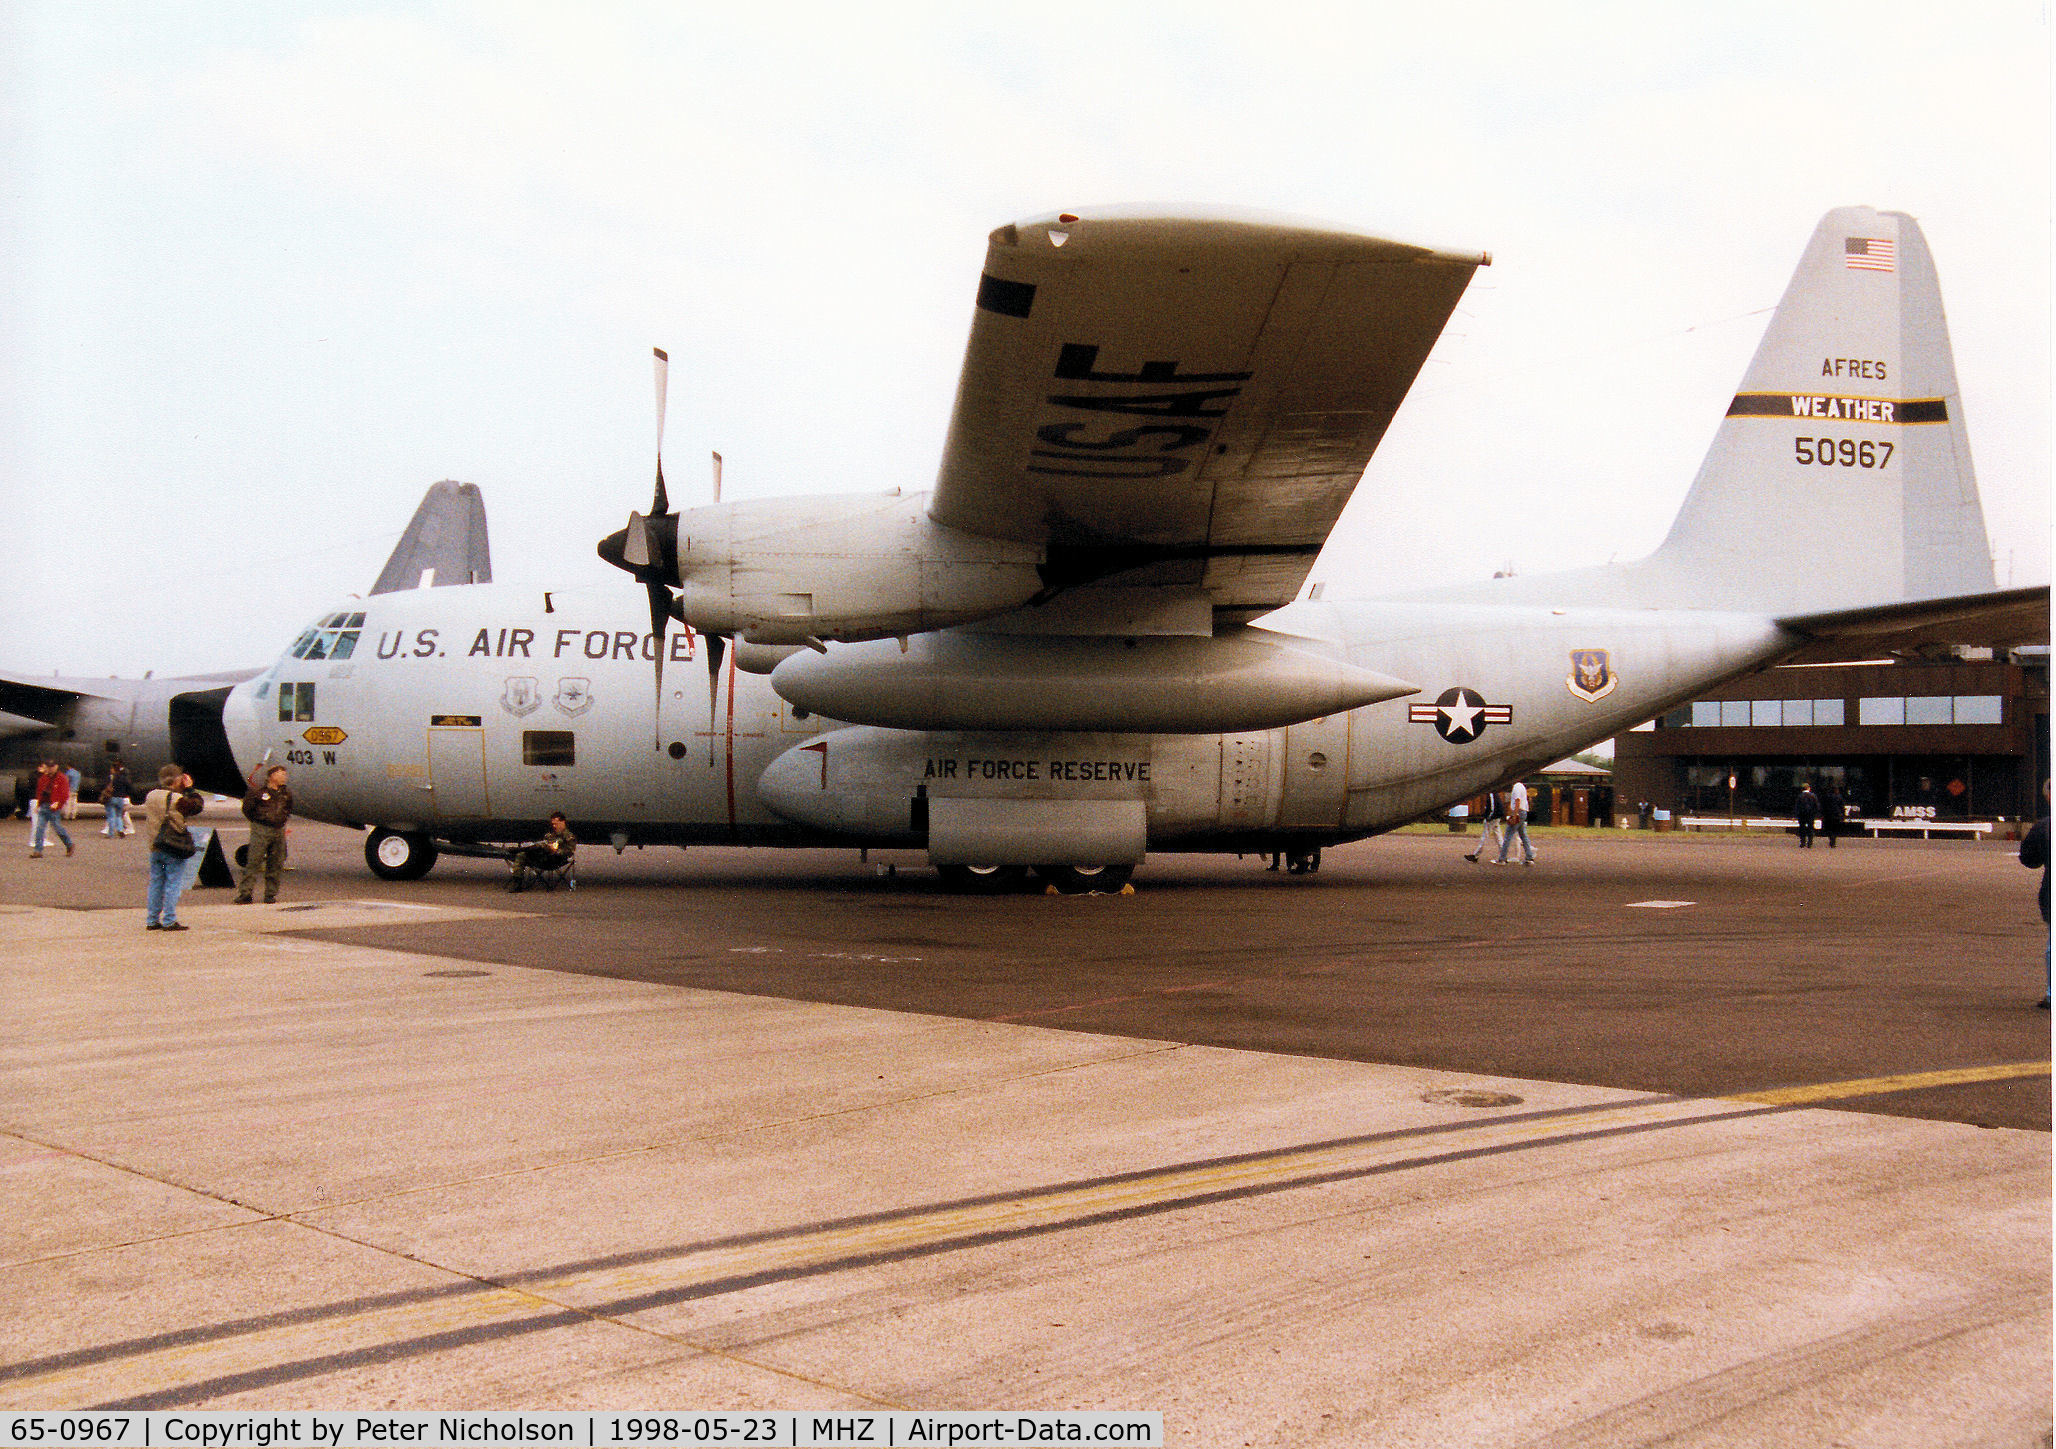 65-0967, 1965 Lockheed WC-130H Hercules C/N 382-4108, WC-130H Hercules of the 53rd Weather Reconnaissance Squadron at Keesler AFB on display at the 1998 RAF Mildenhall Air Fete.